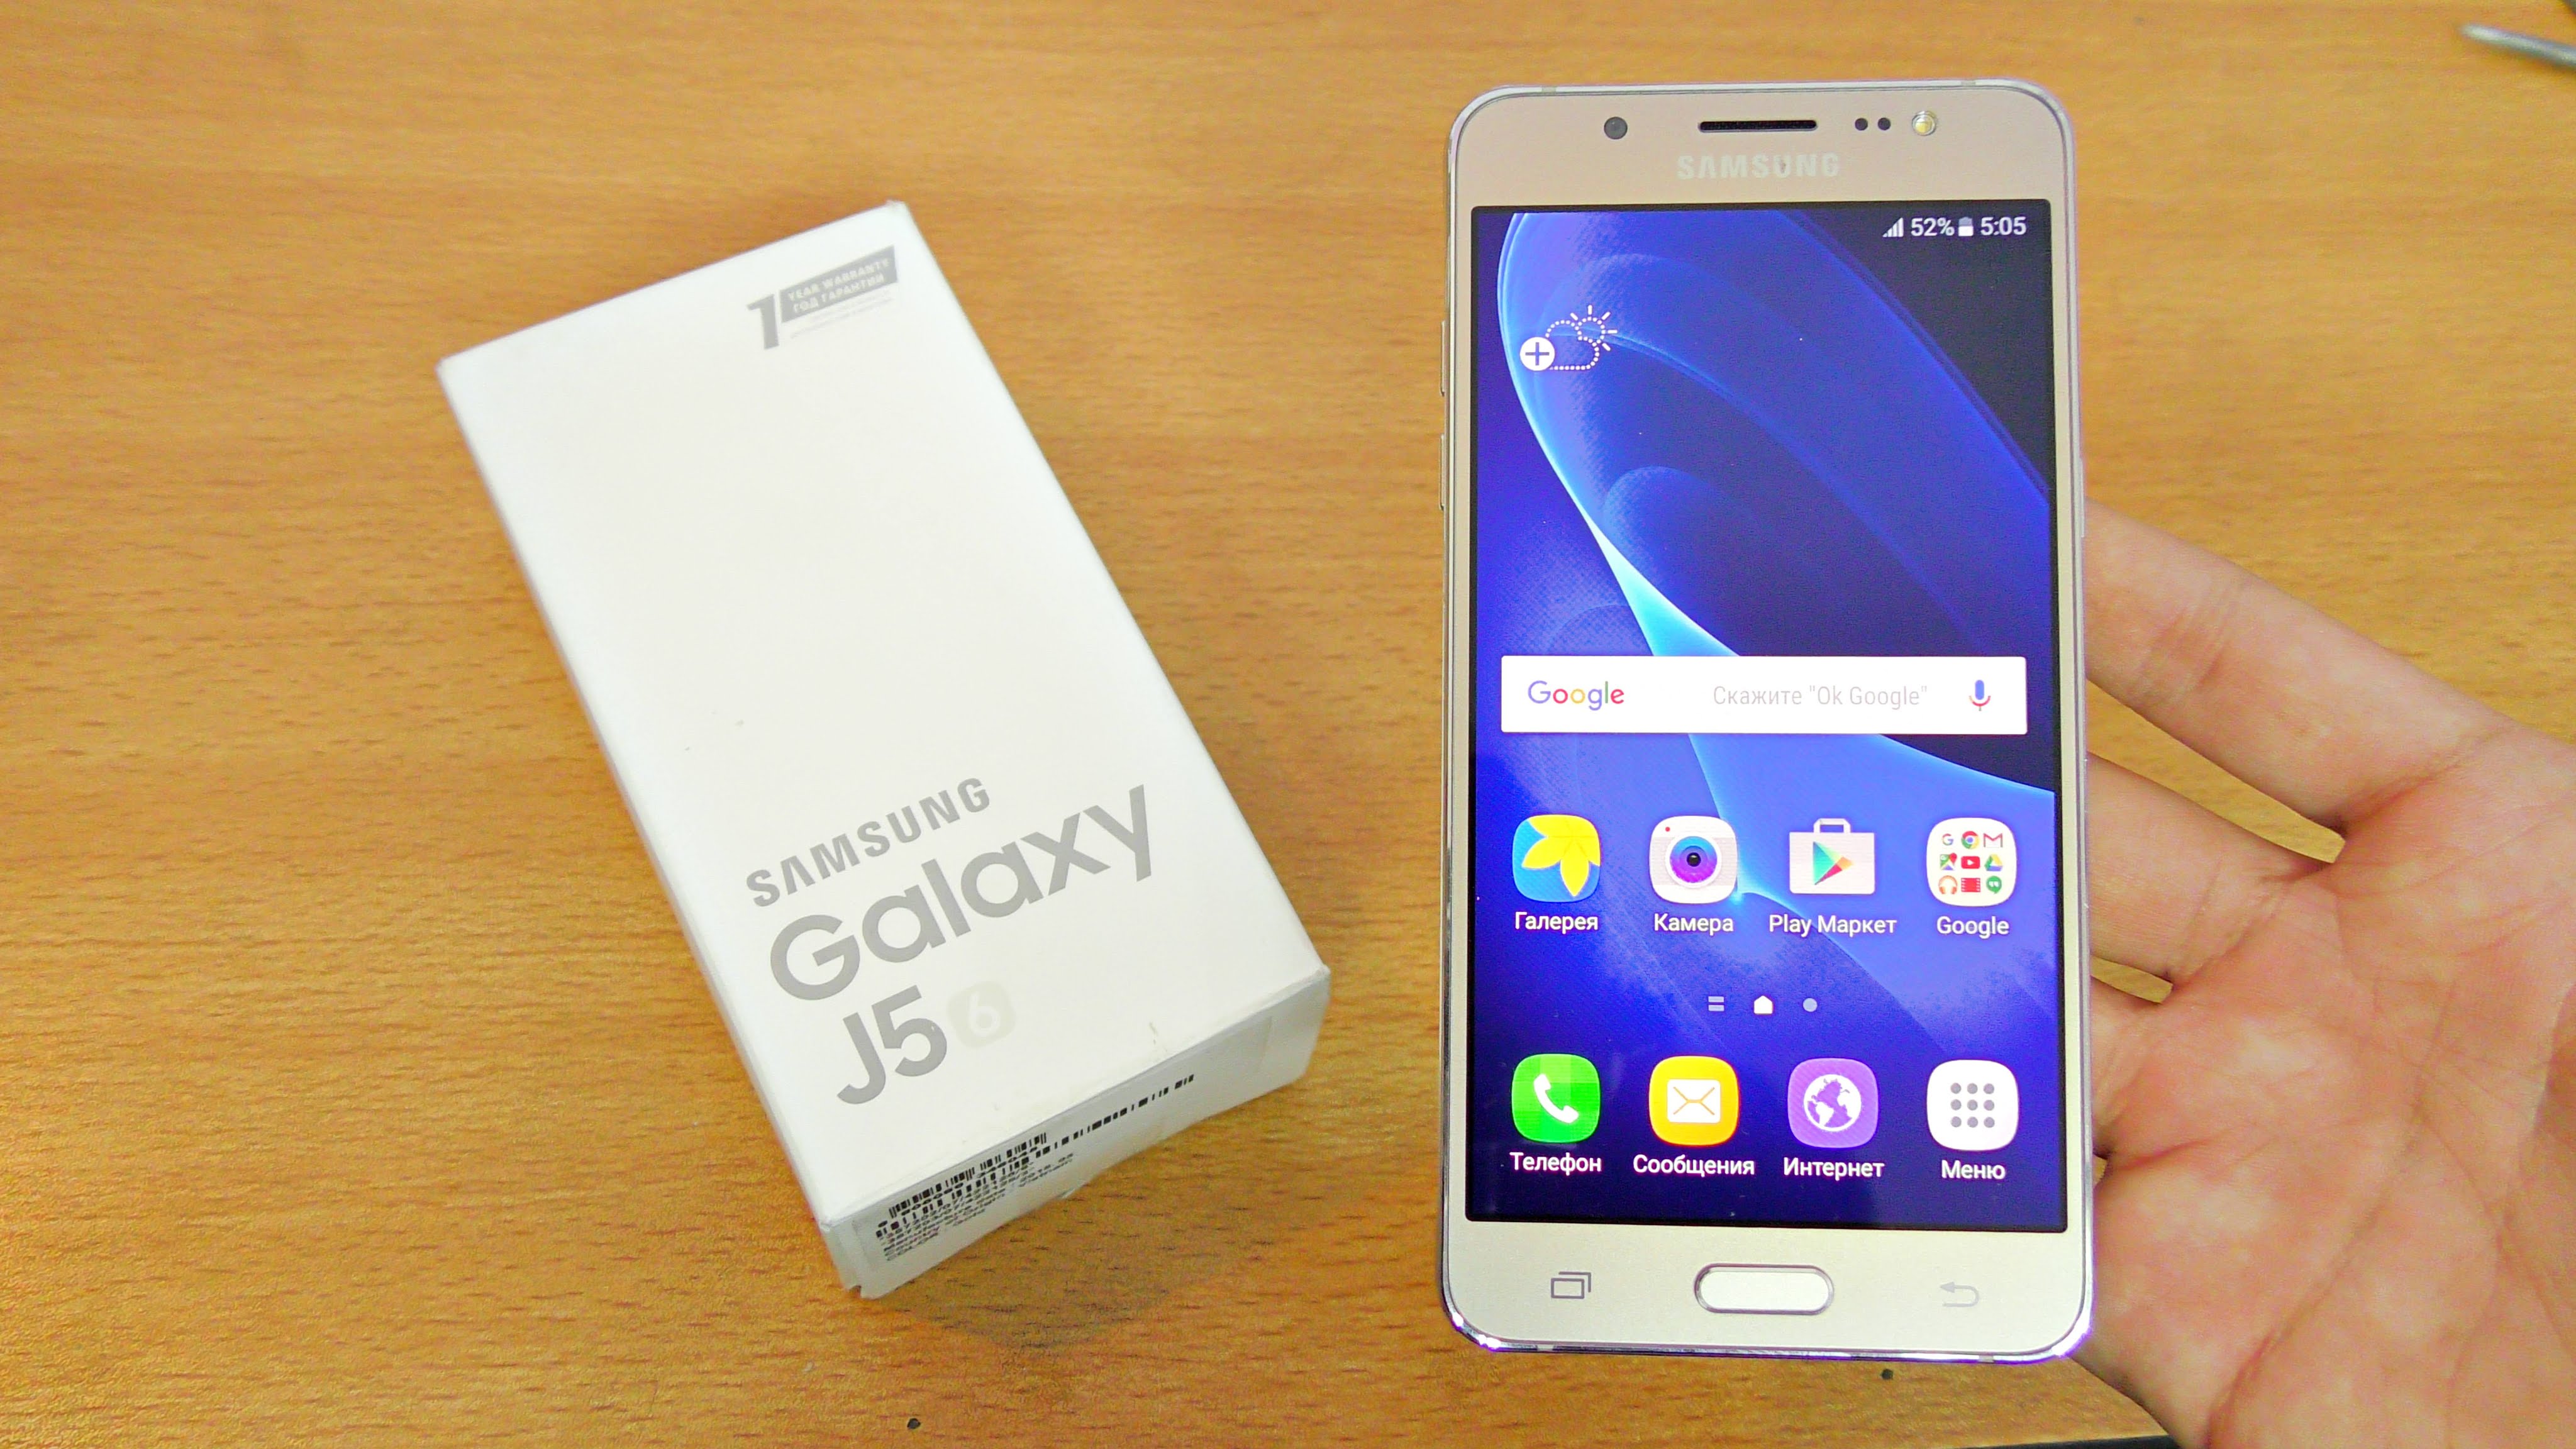 Root Samsung Galaxy J5 2016 with kingroot Step By Step